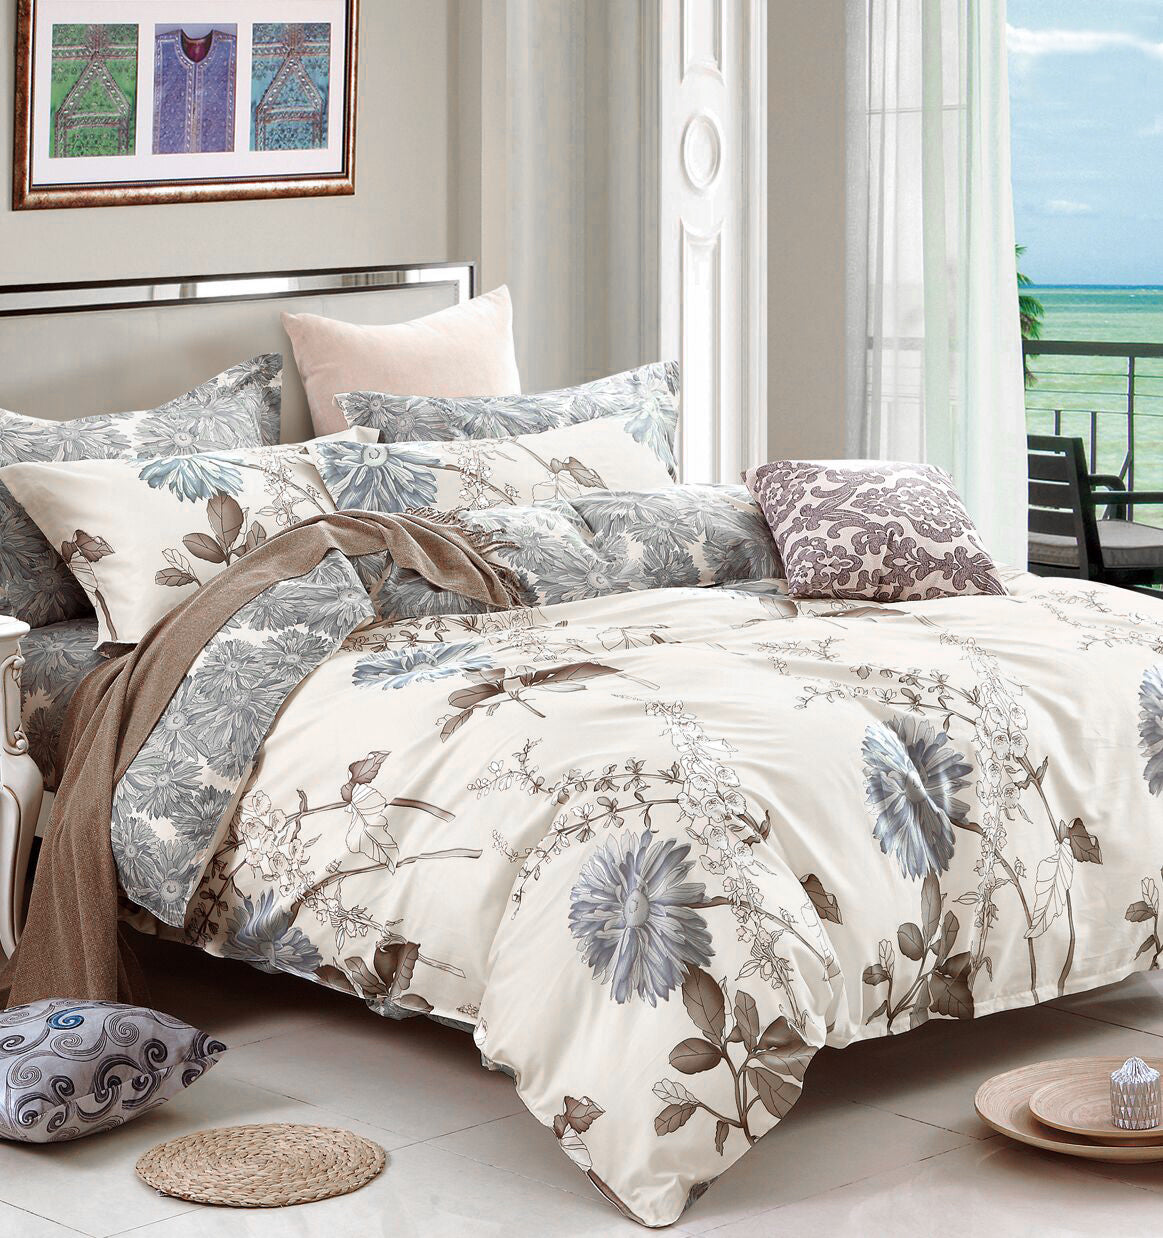 Swanson Beddings Daisy Floral Comforter Set: Comforter and and